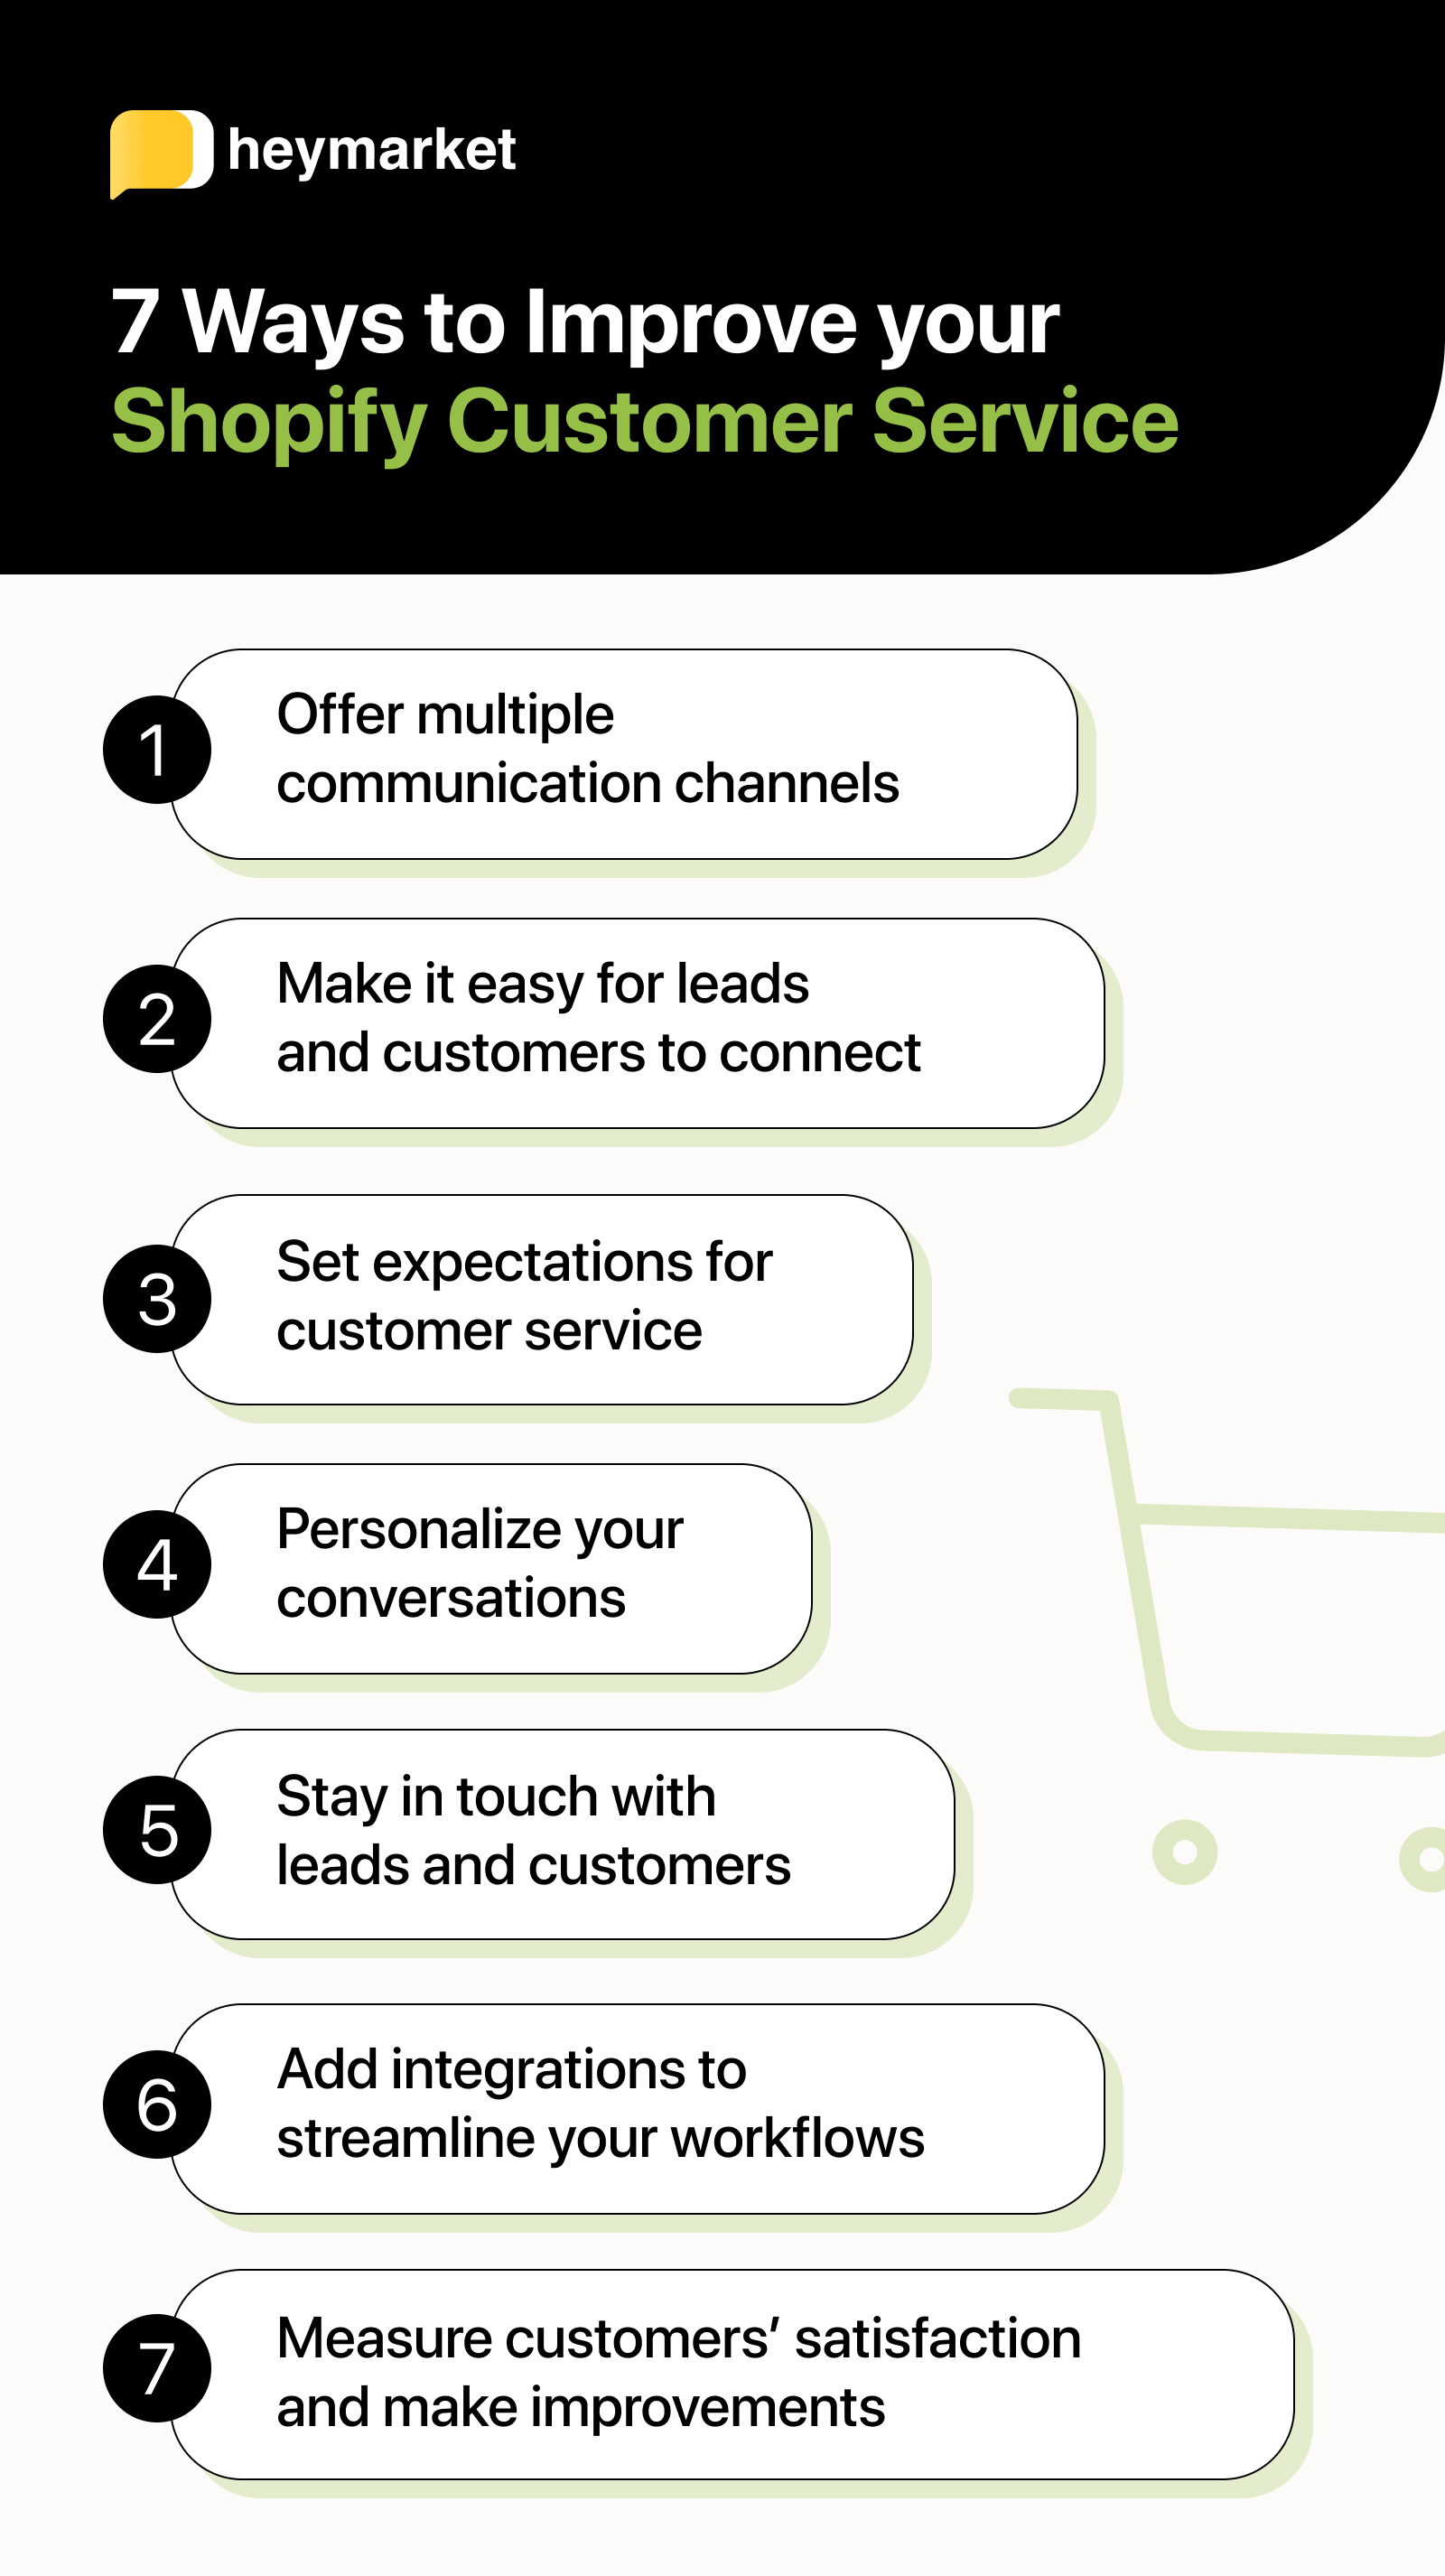 List of 7 tips for improving Shopify customer service.